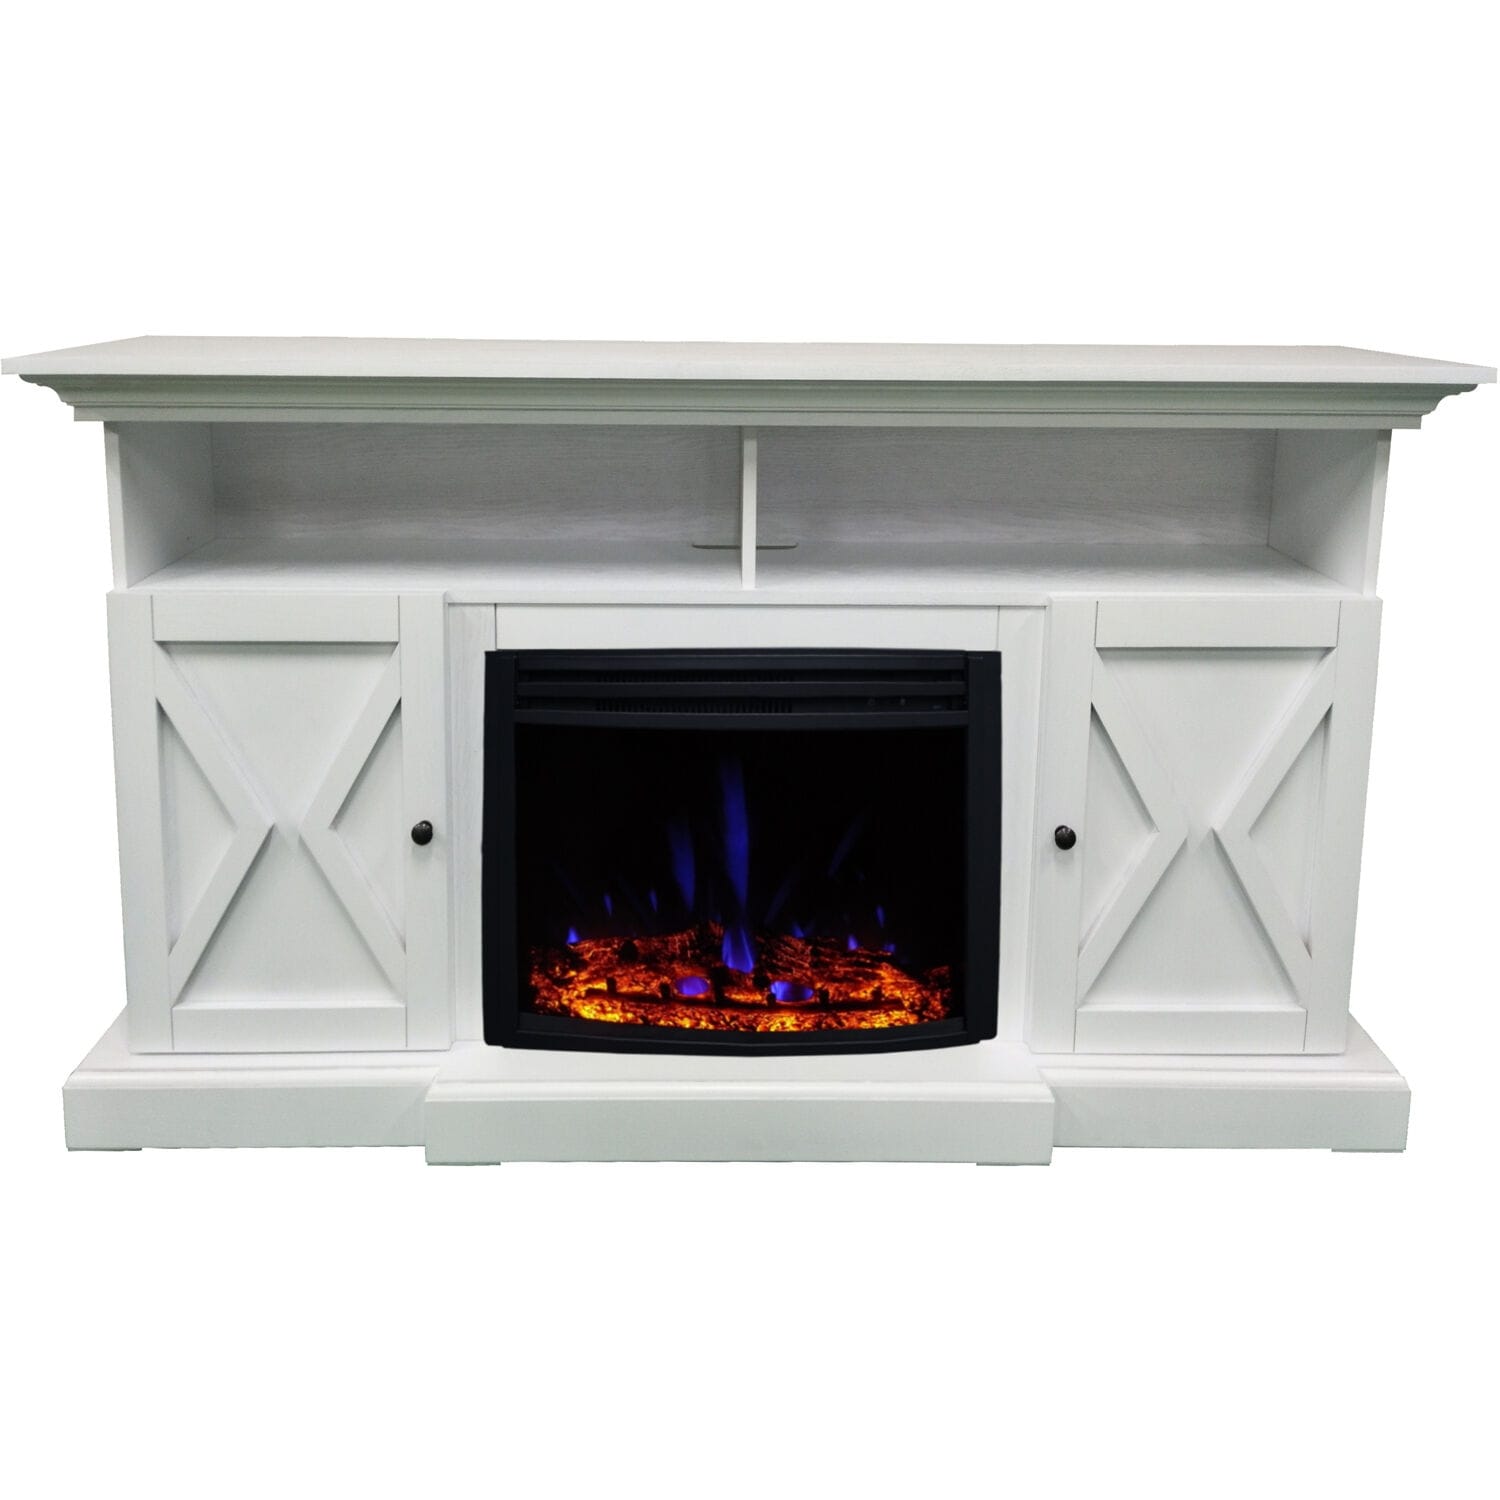 Hanover 62-in. Whitby Farmhouse Electric Fireplace Heater with Deep Log Insert and Multi-Color Flame Display, White - 62 Inch